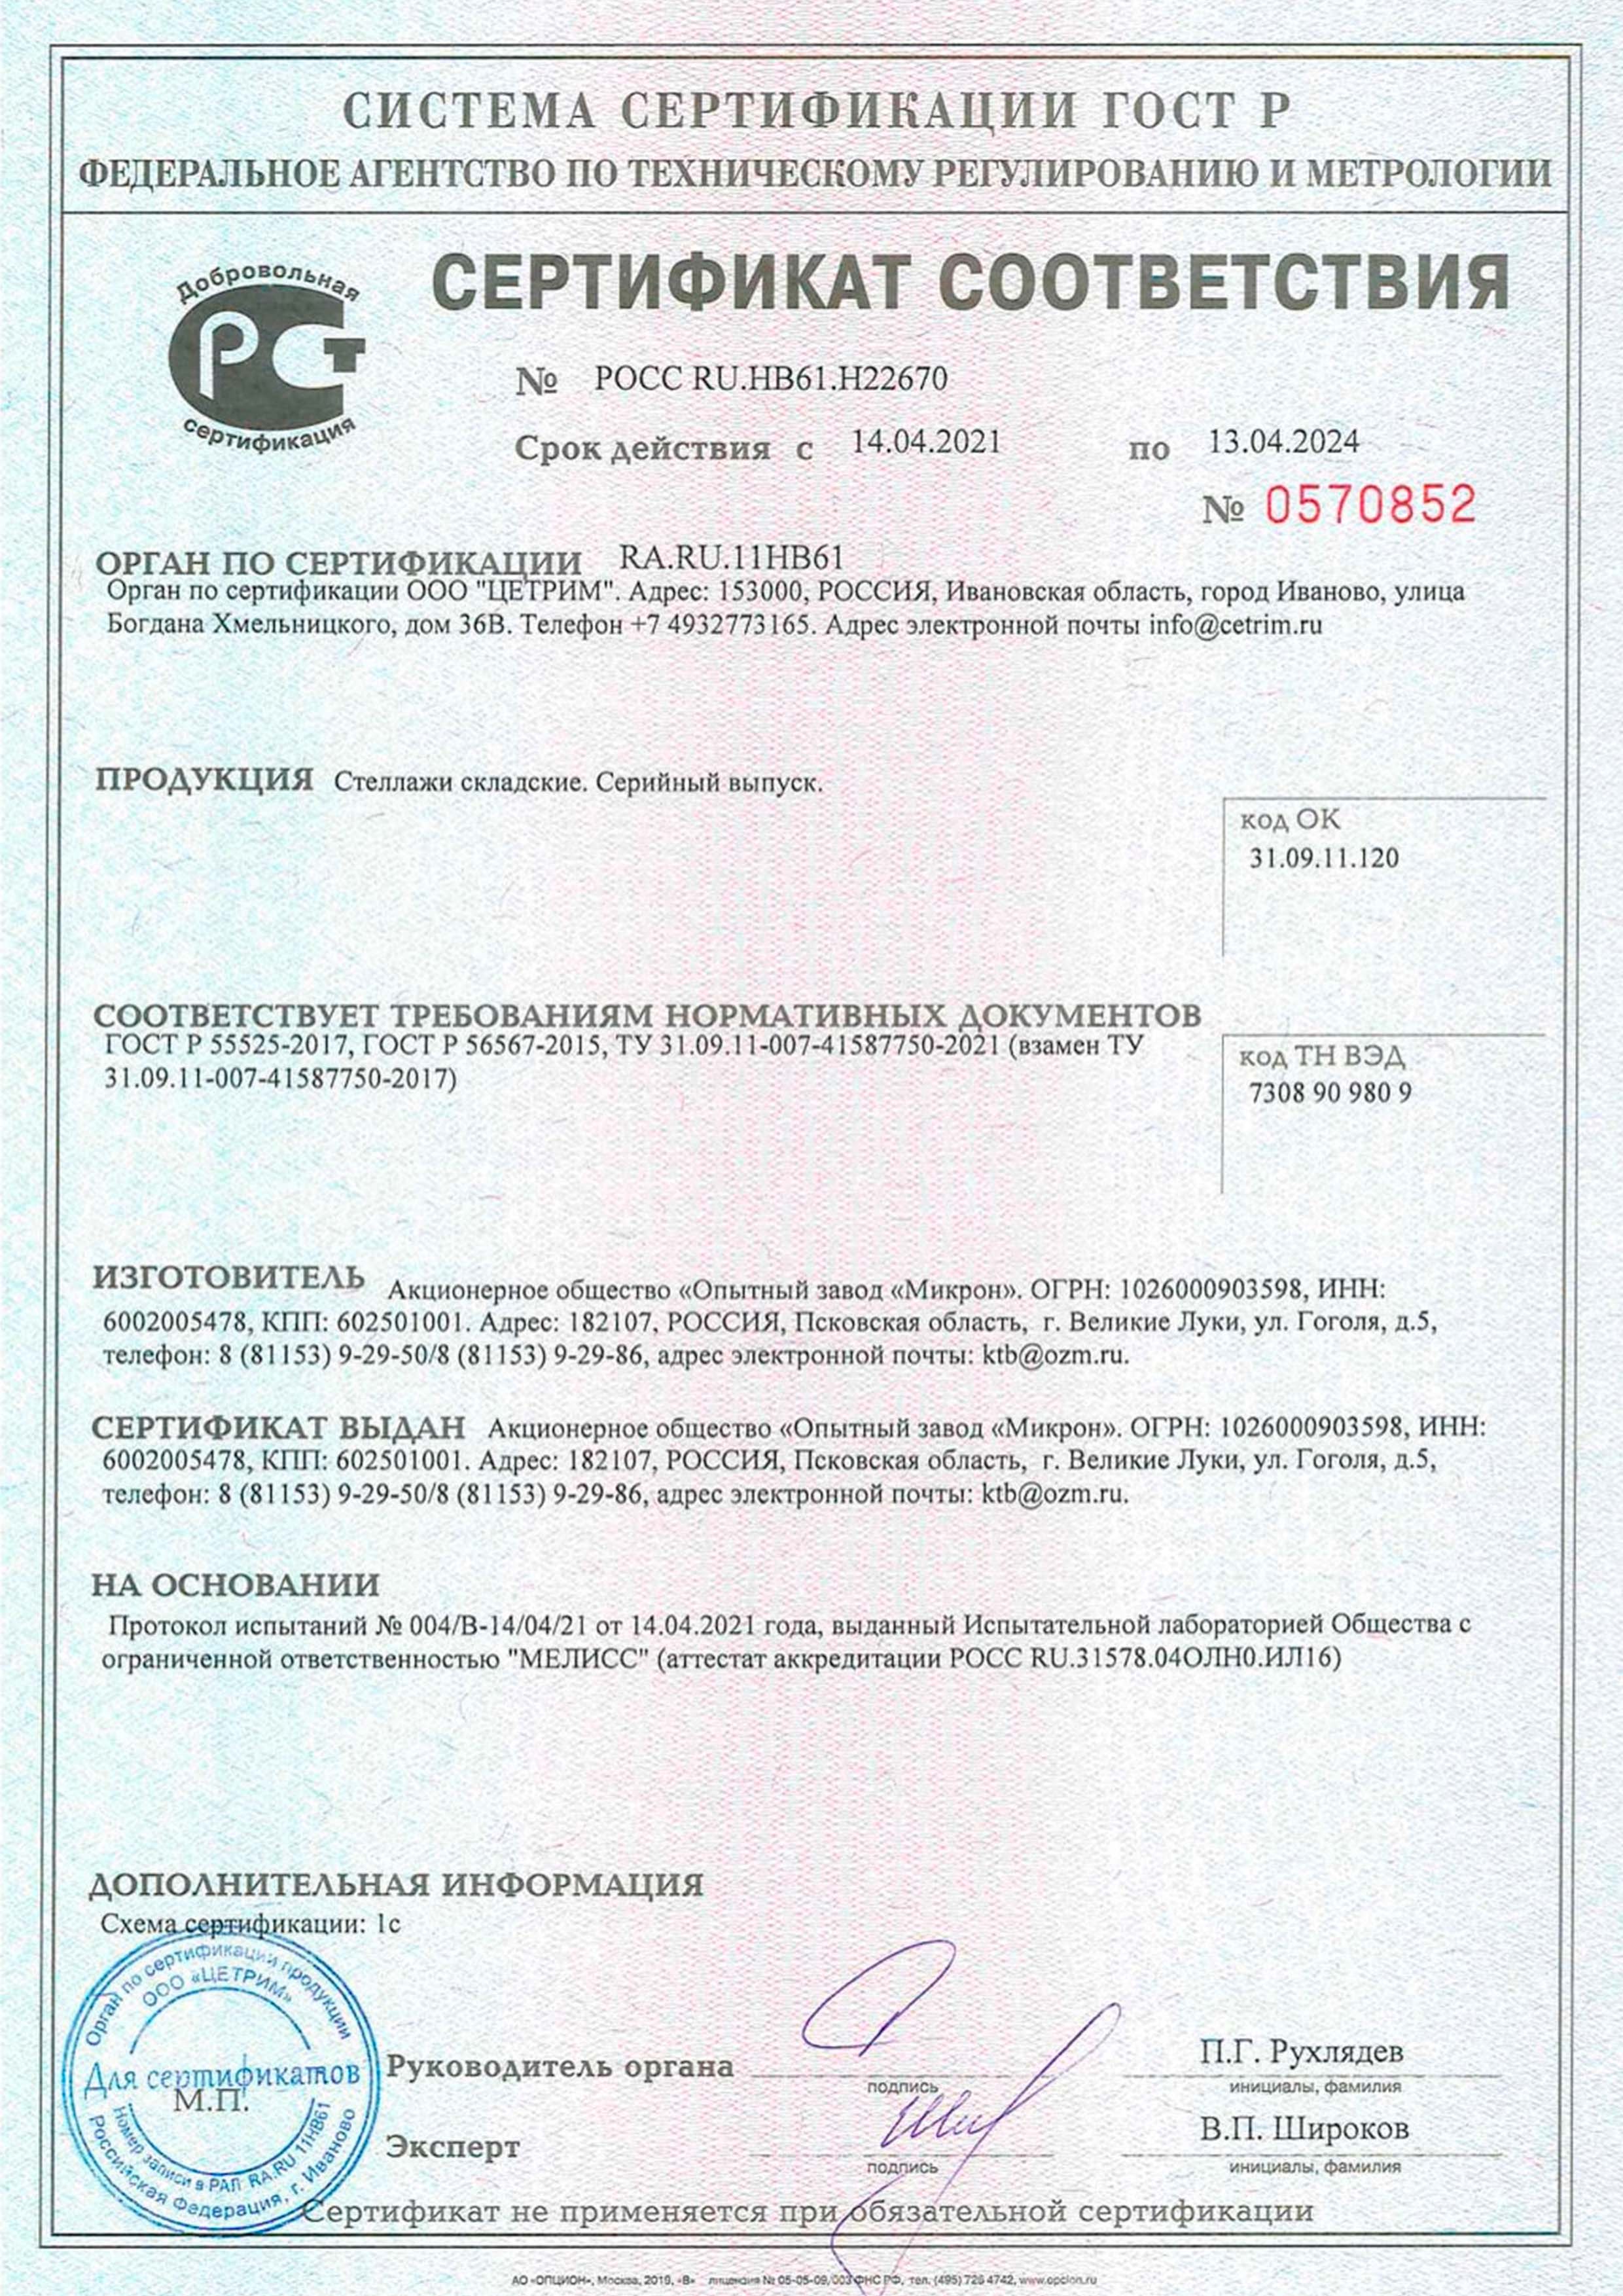 Federal Agency for Technical Regulation and Metrology. Certificate of Conformity